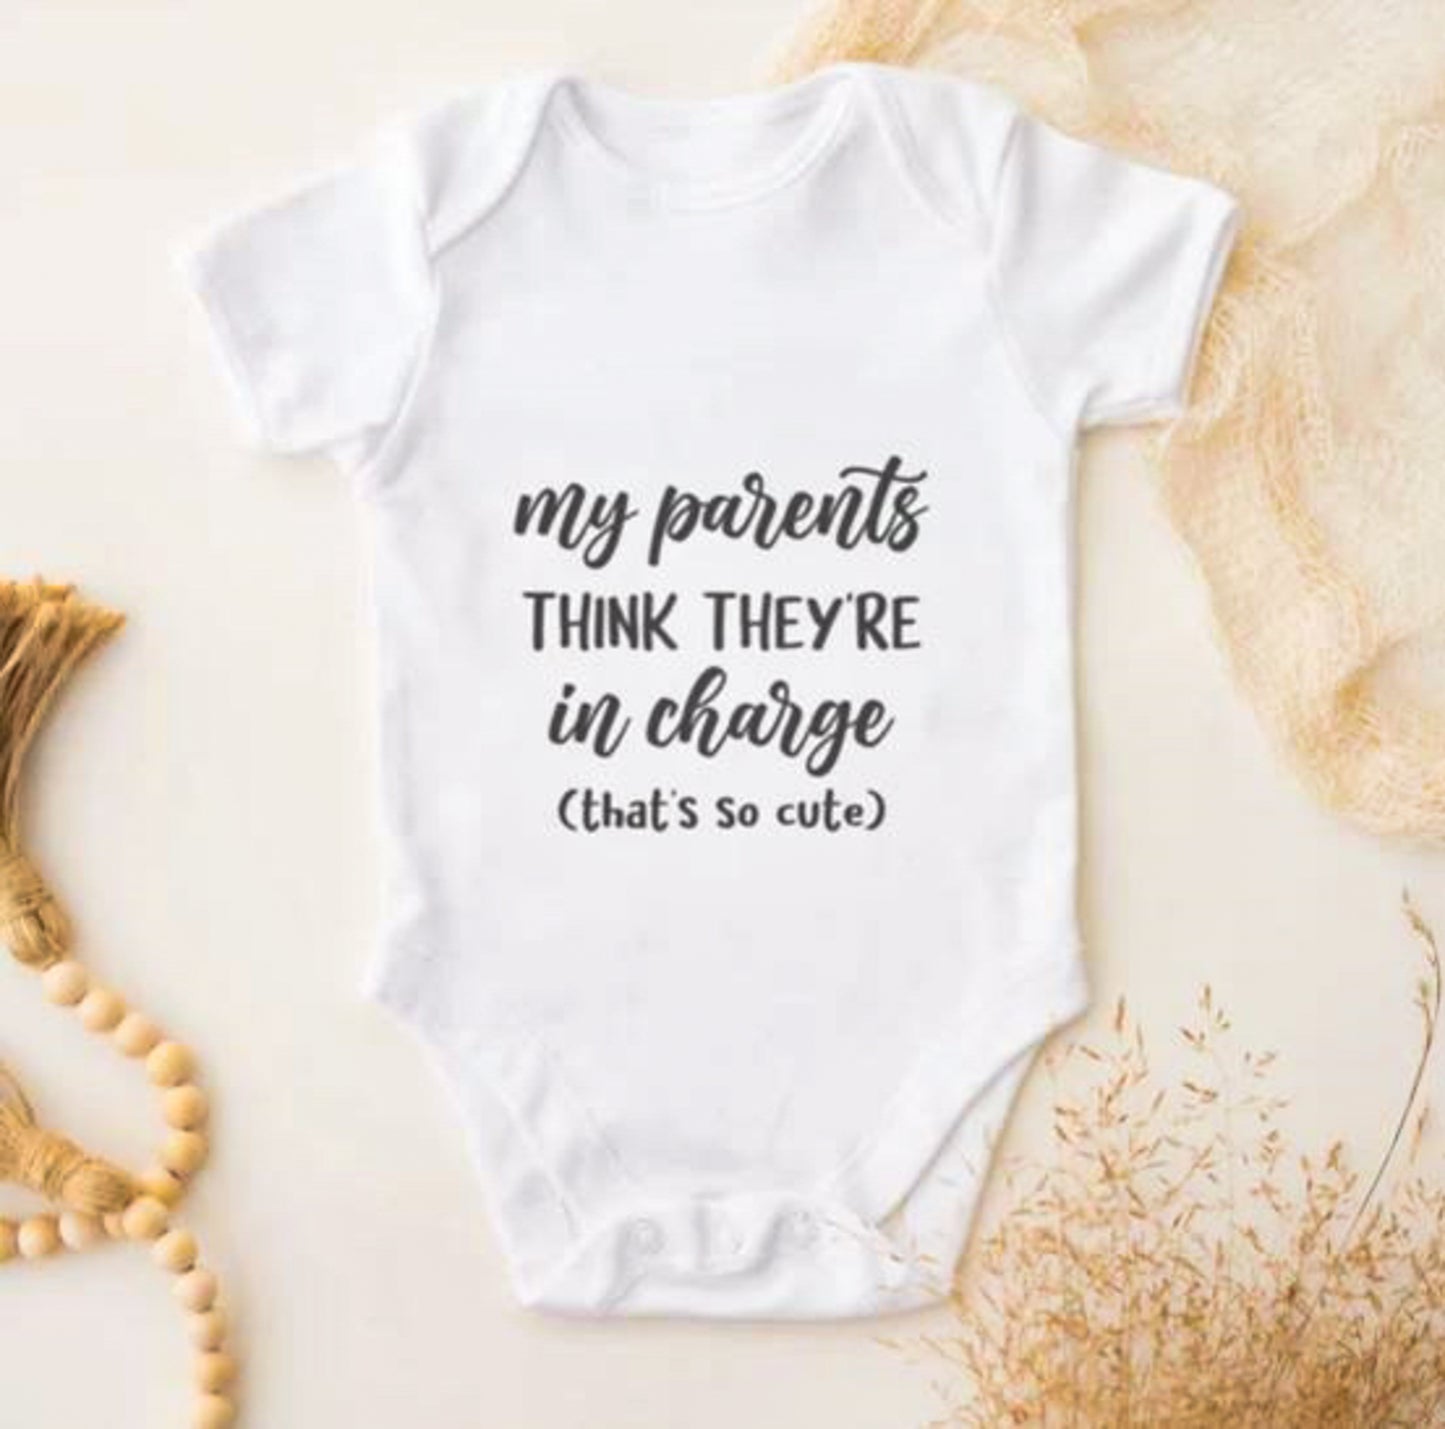 My Parents Think They're In Charge (That's So Cute) Tee